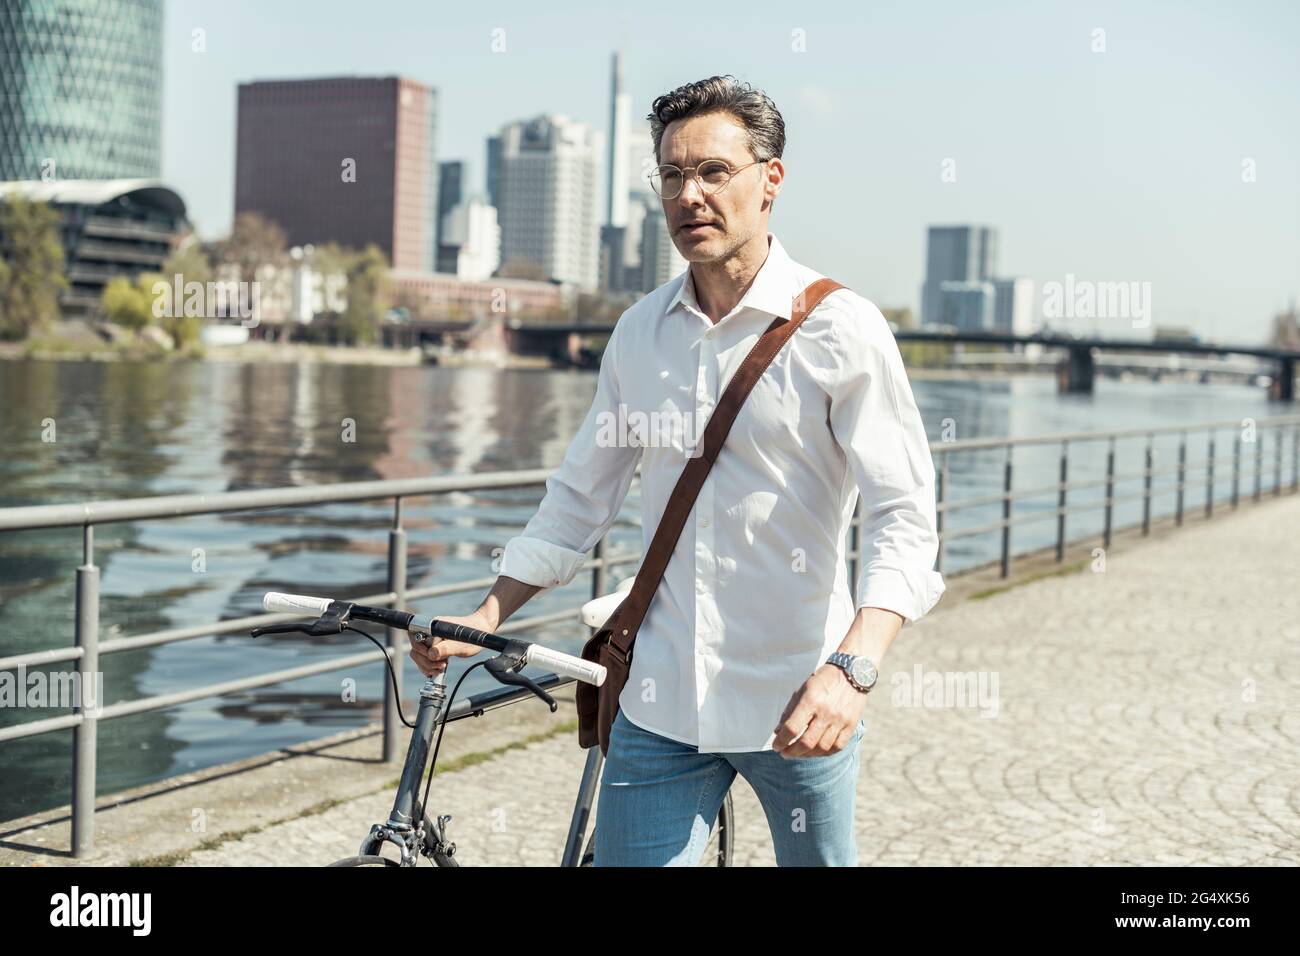 Businessman walking with bicycle in city Stock Photo